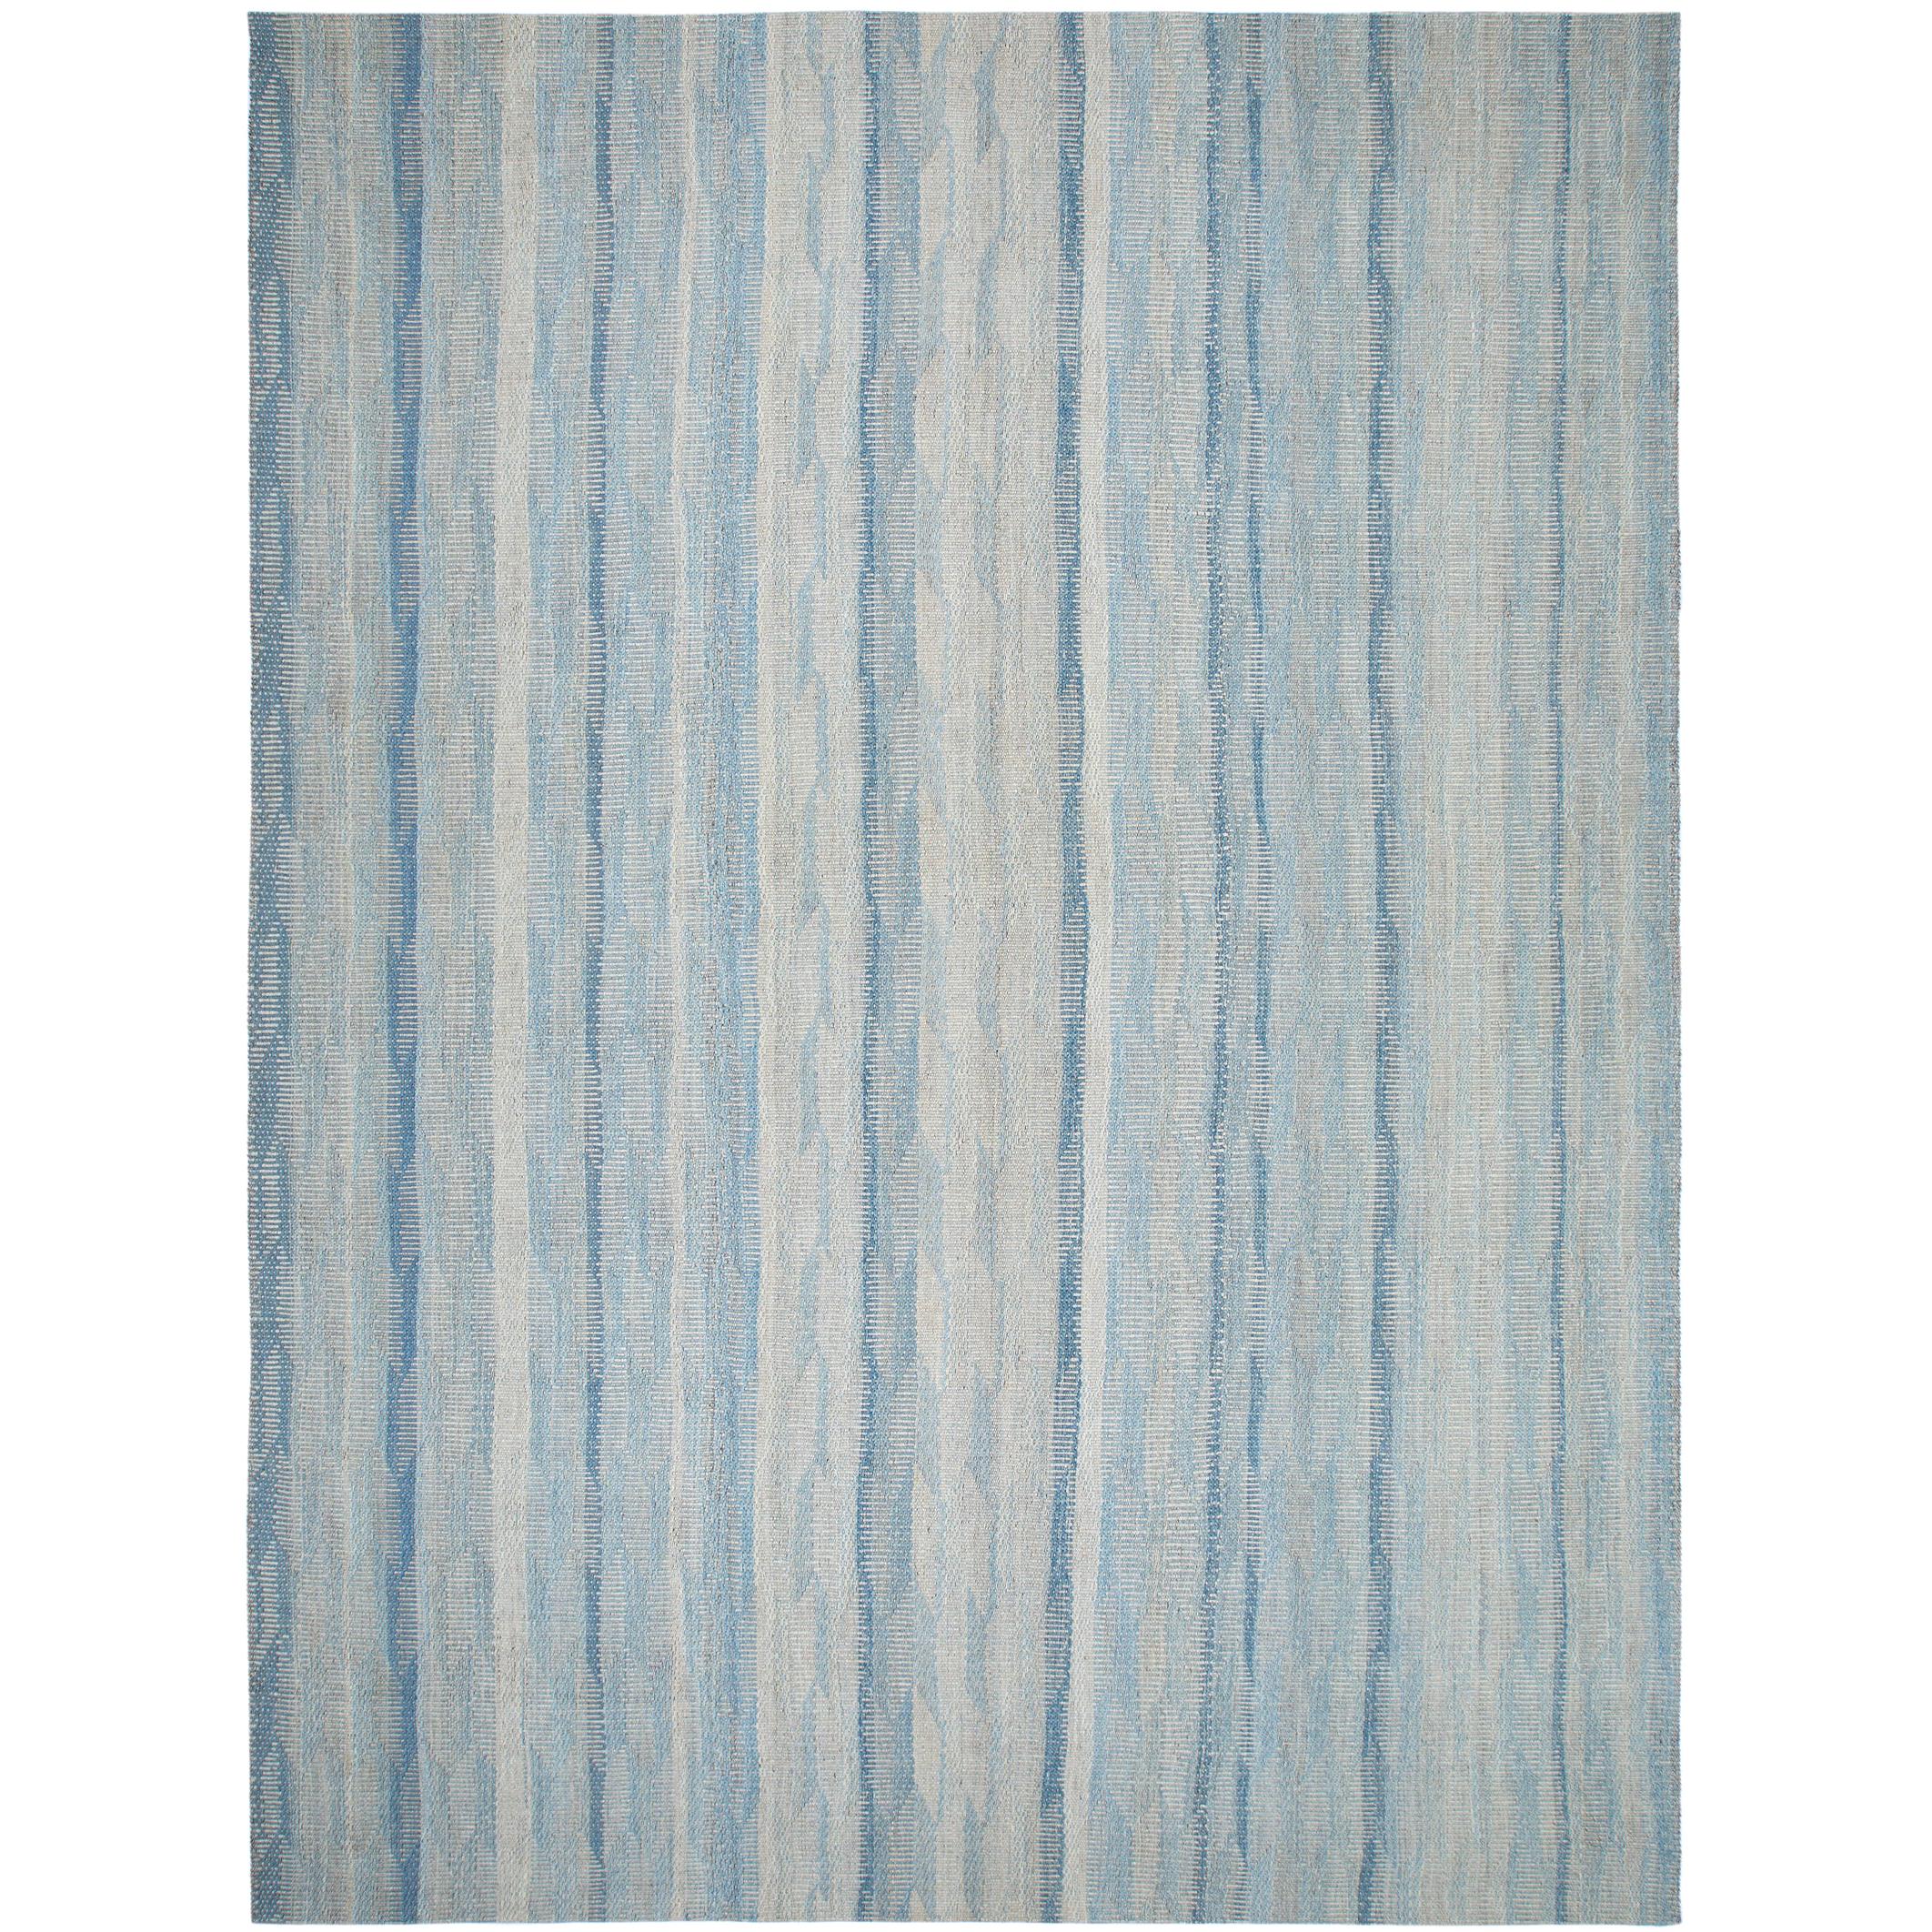 Modern Unique Handwoven Textured Flat-Weave Rug in Shades of Blue For Sale